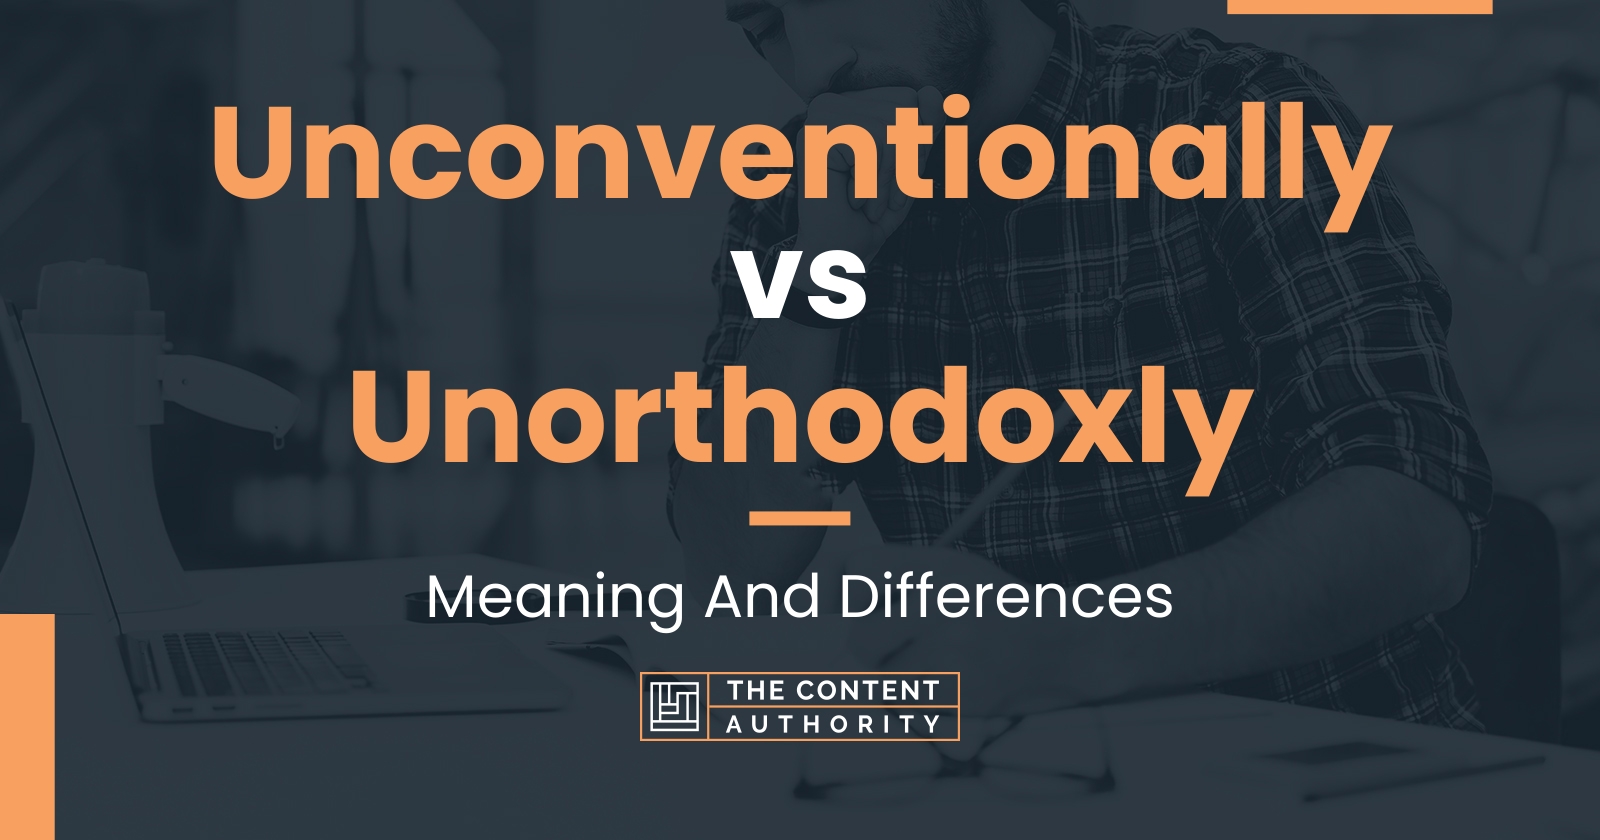 Unconventionally vs Unorthodoxly: Meaning And Differences